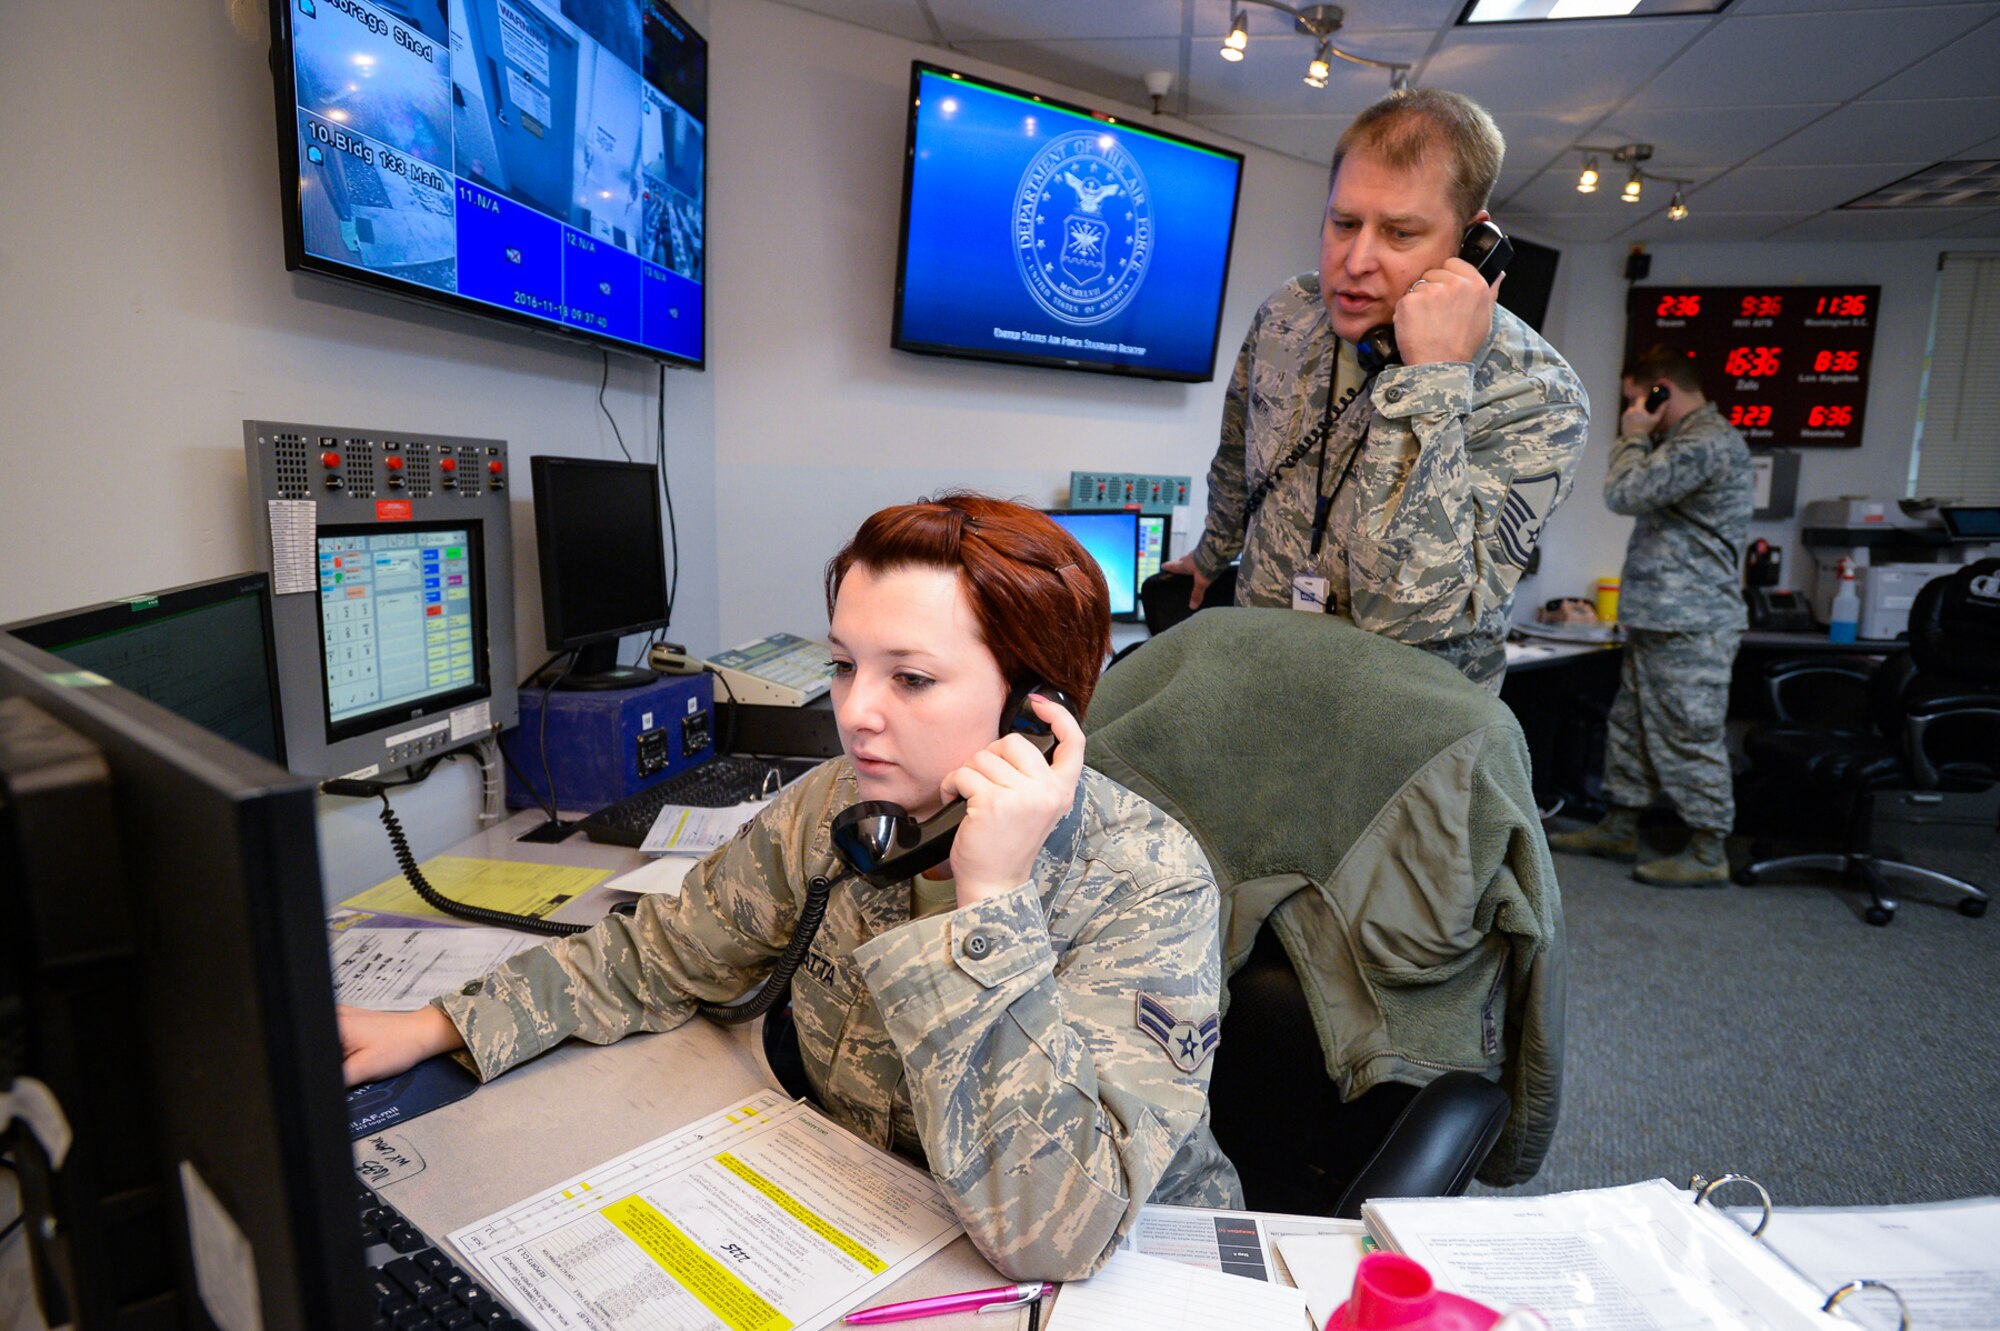 Emergency actions controllers Airman 1st Class Meggan Van Atta, Master Sgt. Jeremy Smith, and Senior Airman Jeremy Odneal answer response calls in the Hill Command Post, Nov. 18, 2016. Command post specialists ensure base operations and communications run efficiently and effectively under any circumstance by providing command, control, communications and information support. (U.S. Air Force photo by R. Nial Bradshaw)